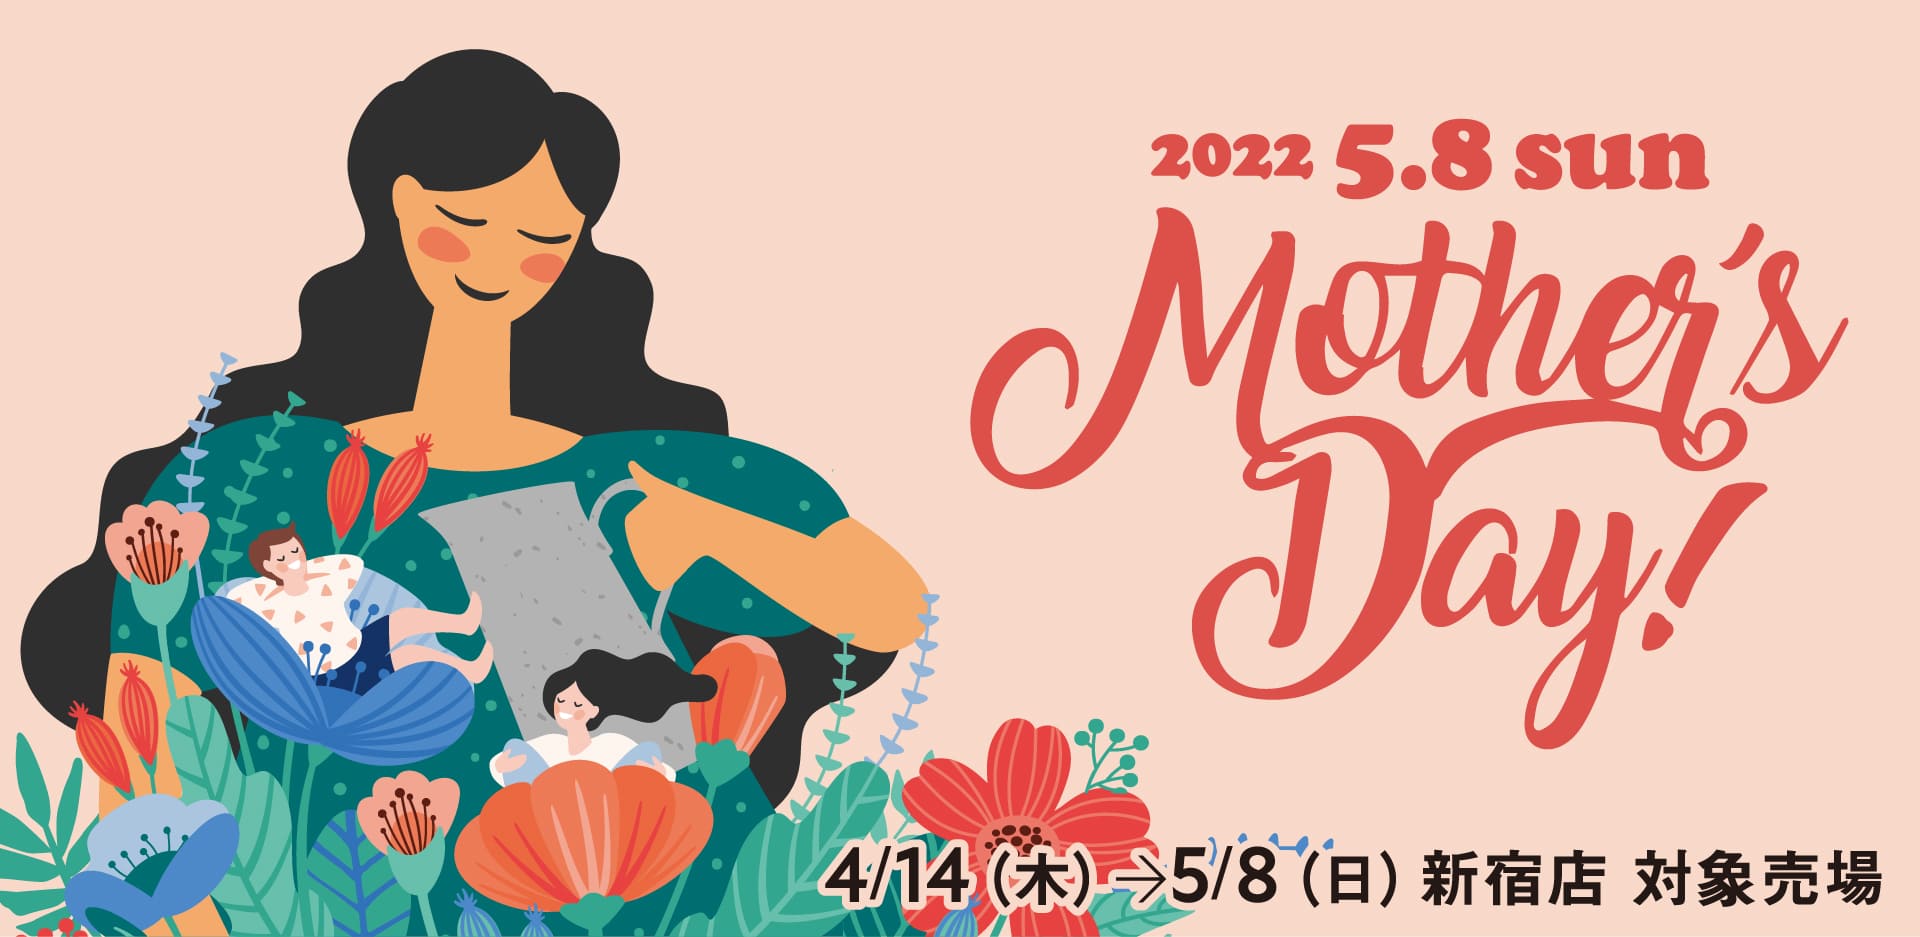 2022 Keio Mother's Day -母の日-｜京王百貨店 新宿店